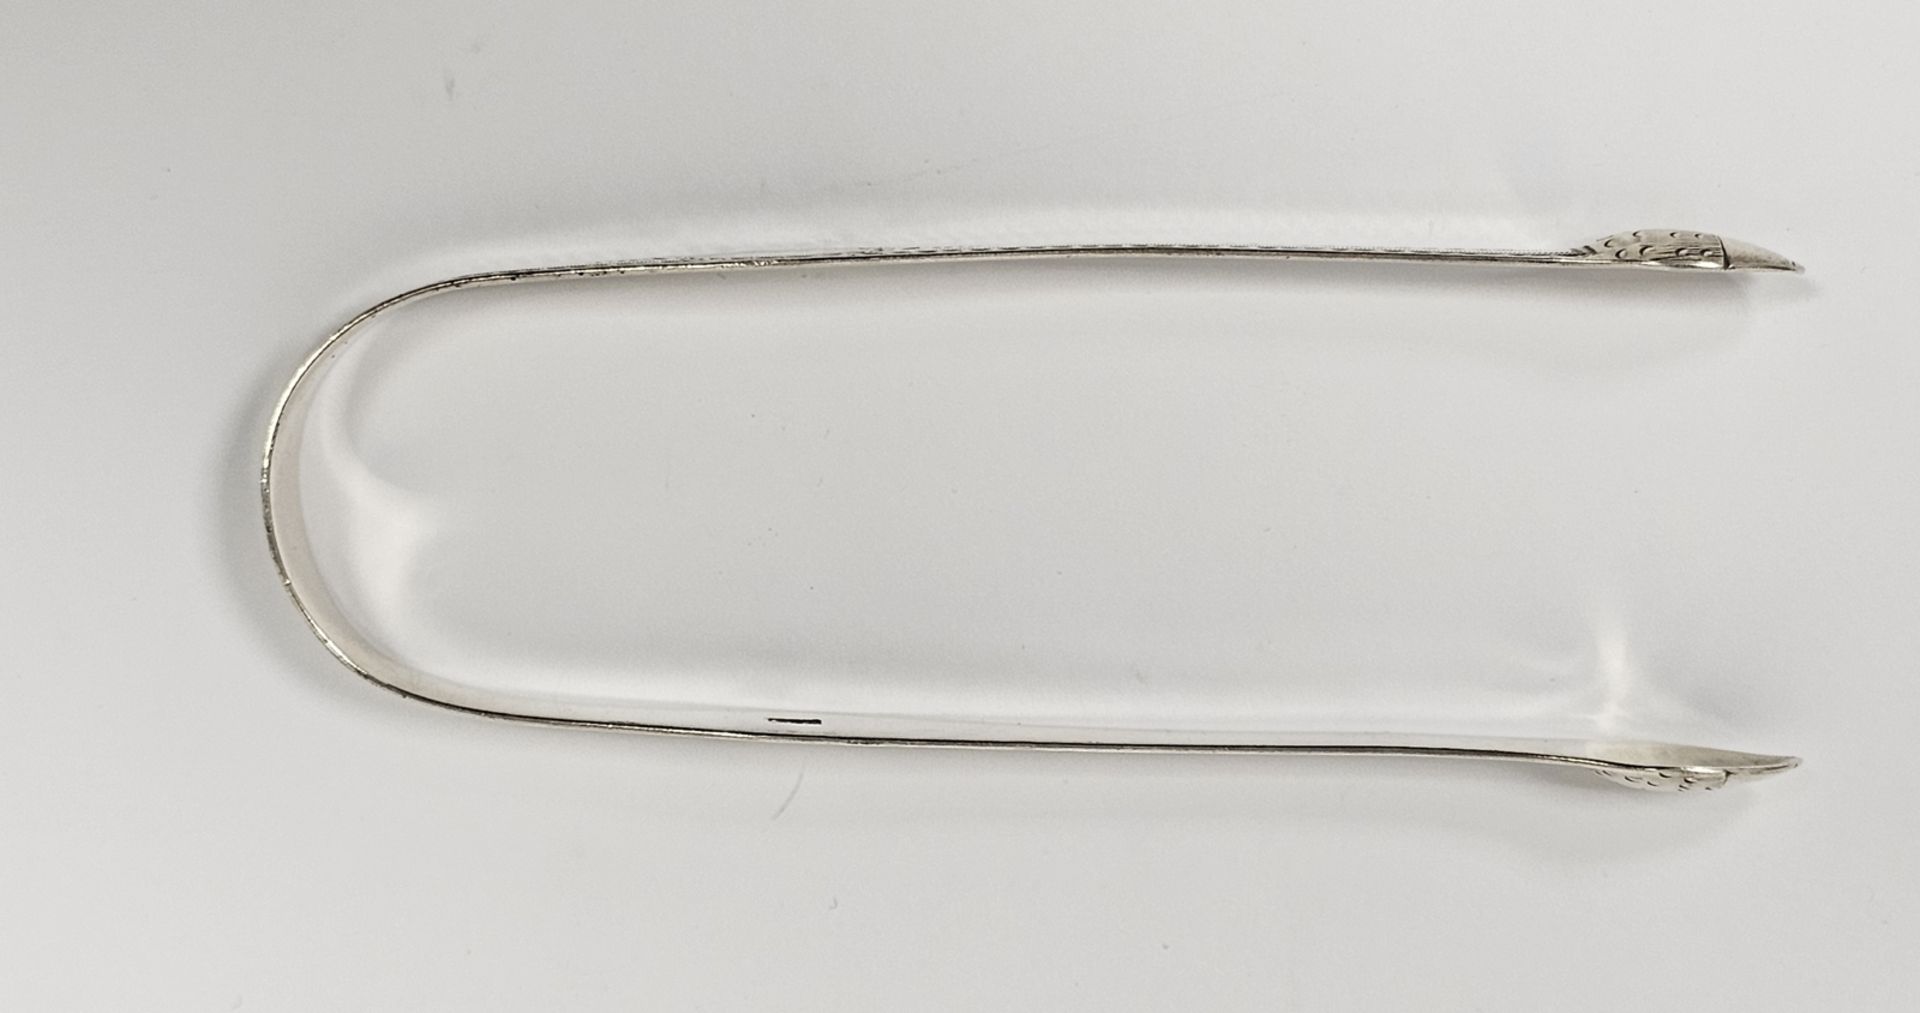 Pair of George III silver bright cut sugar tongs by Thomas Oliphant, 1ozt approx. - Image 2 of 4